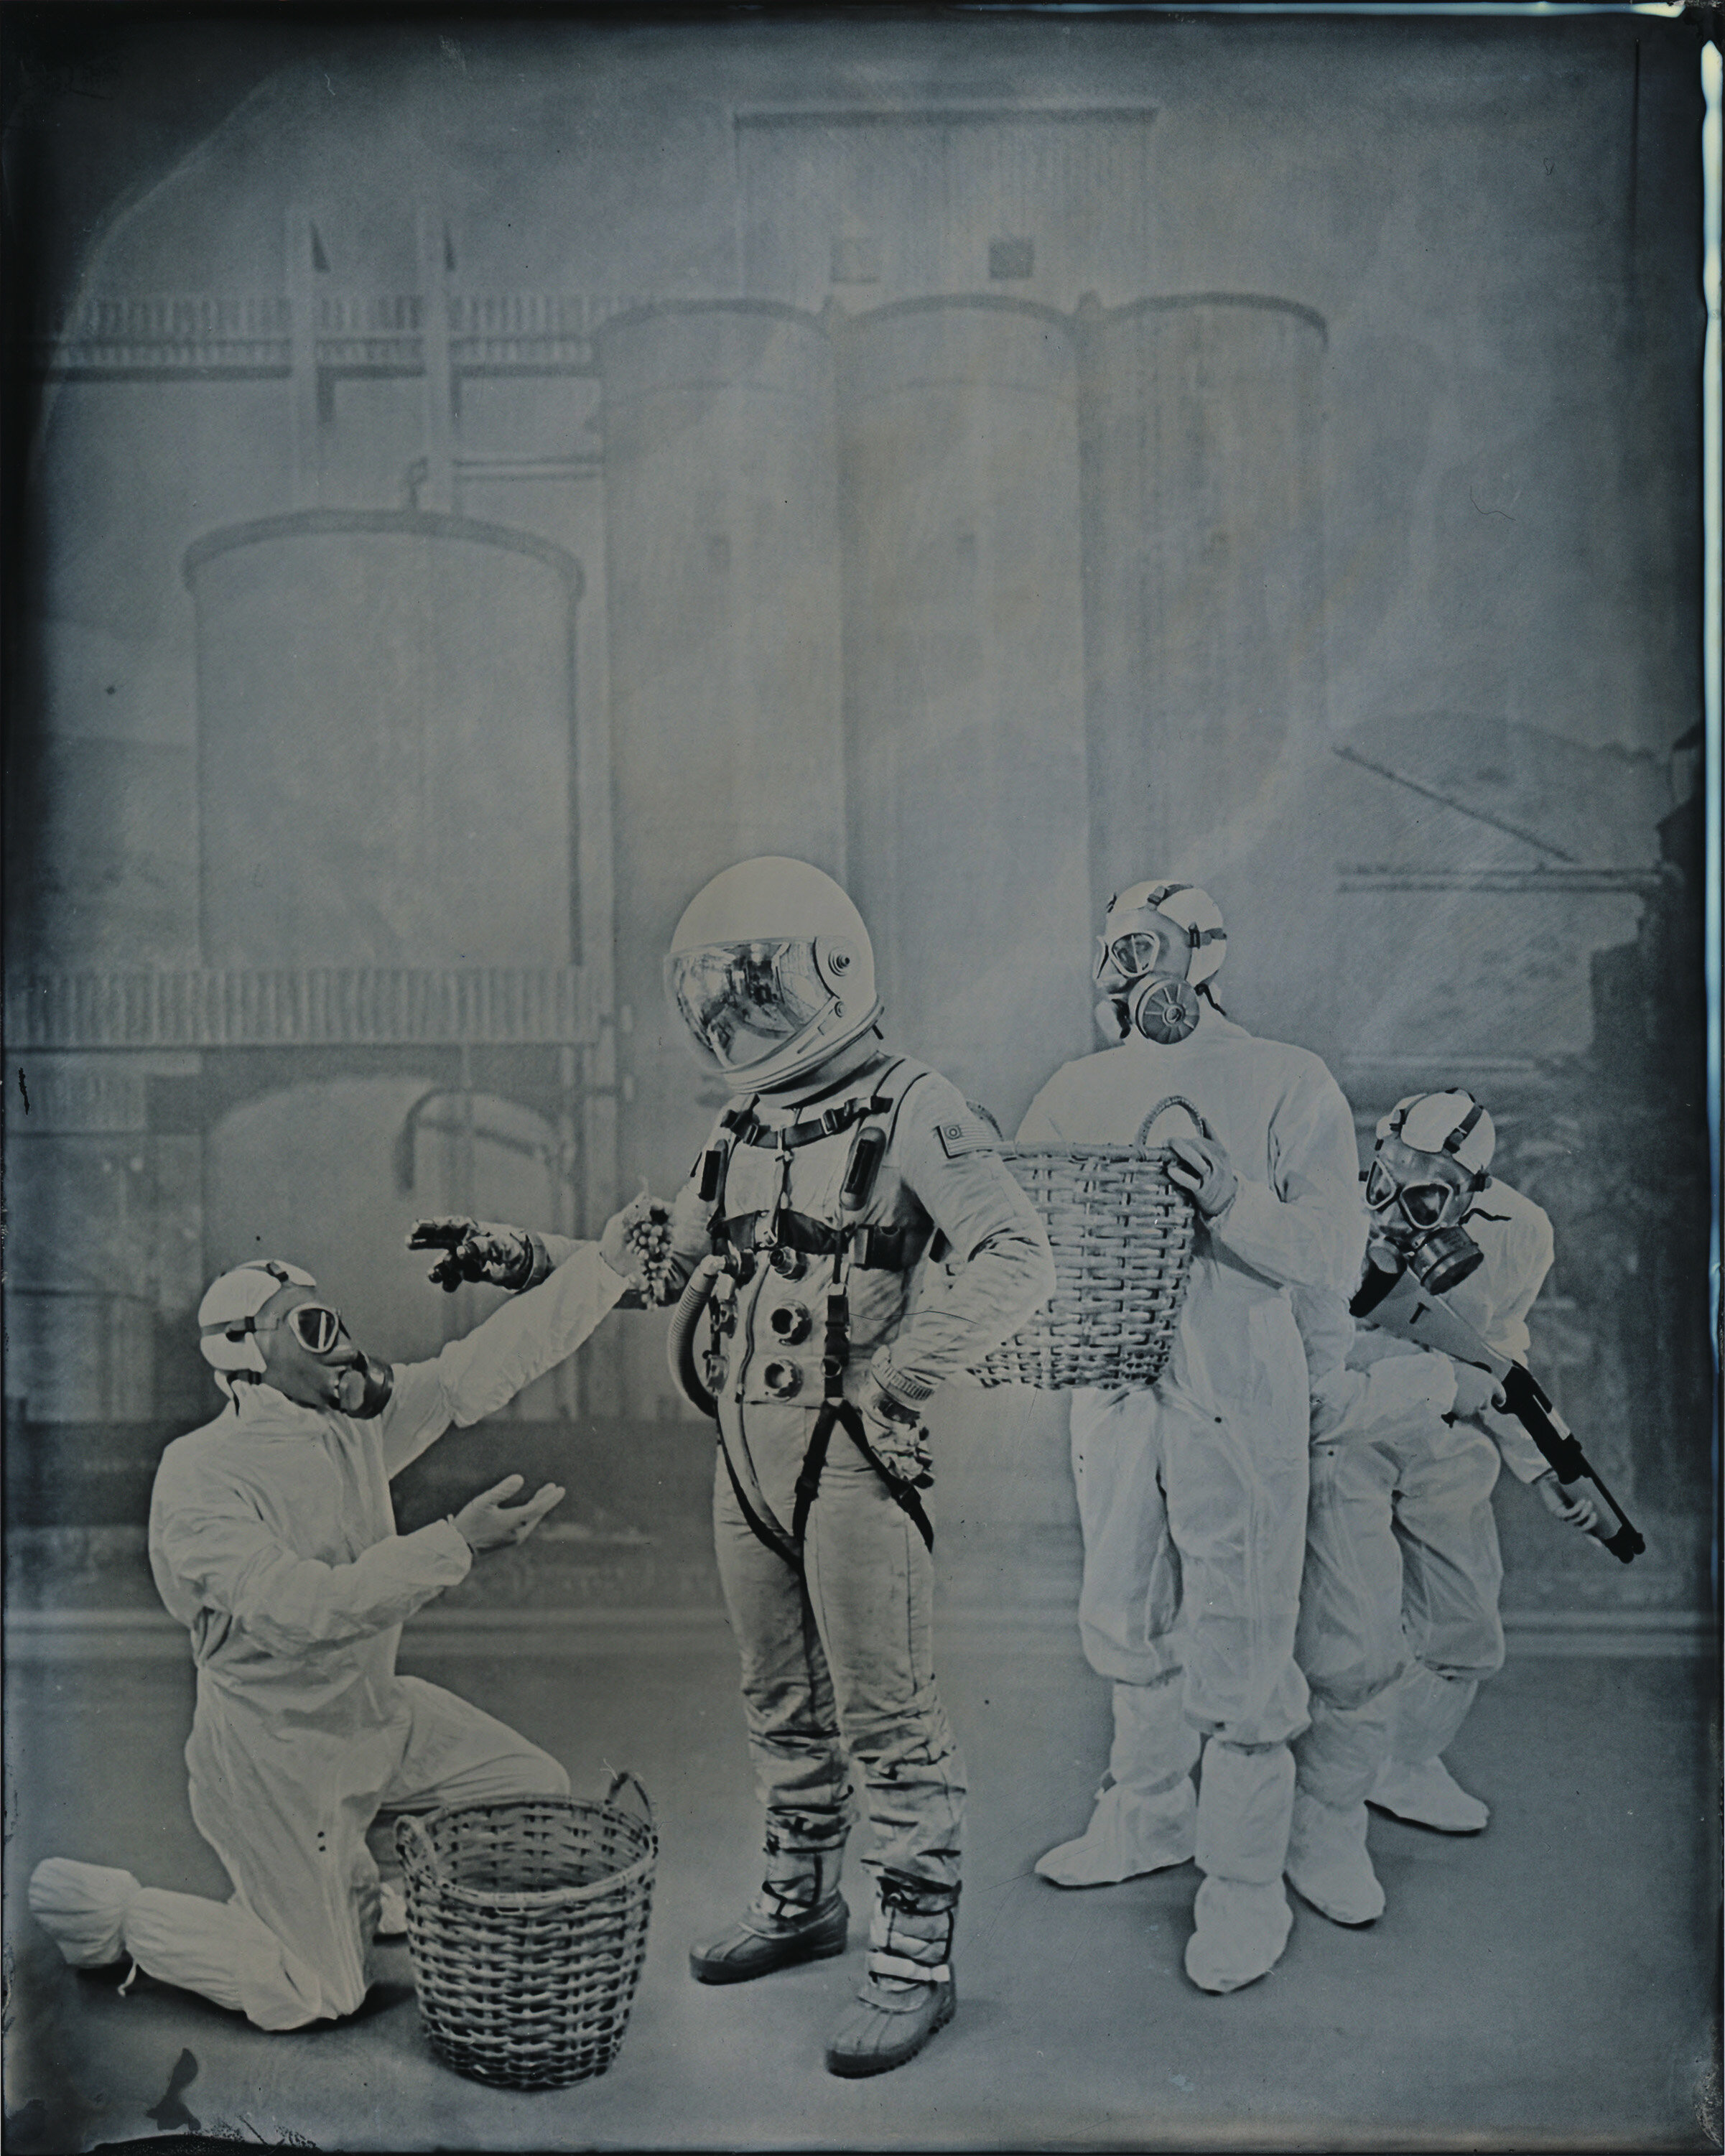   “The Greeting Party”   2021  Wet Plate Collodion  8x10 